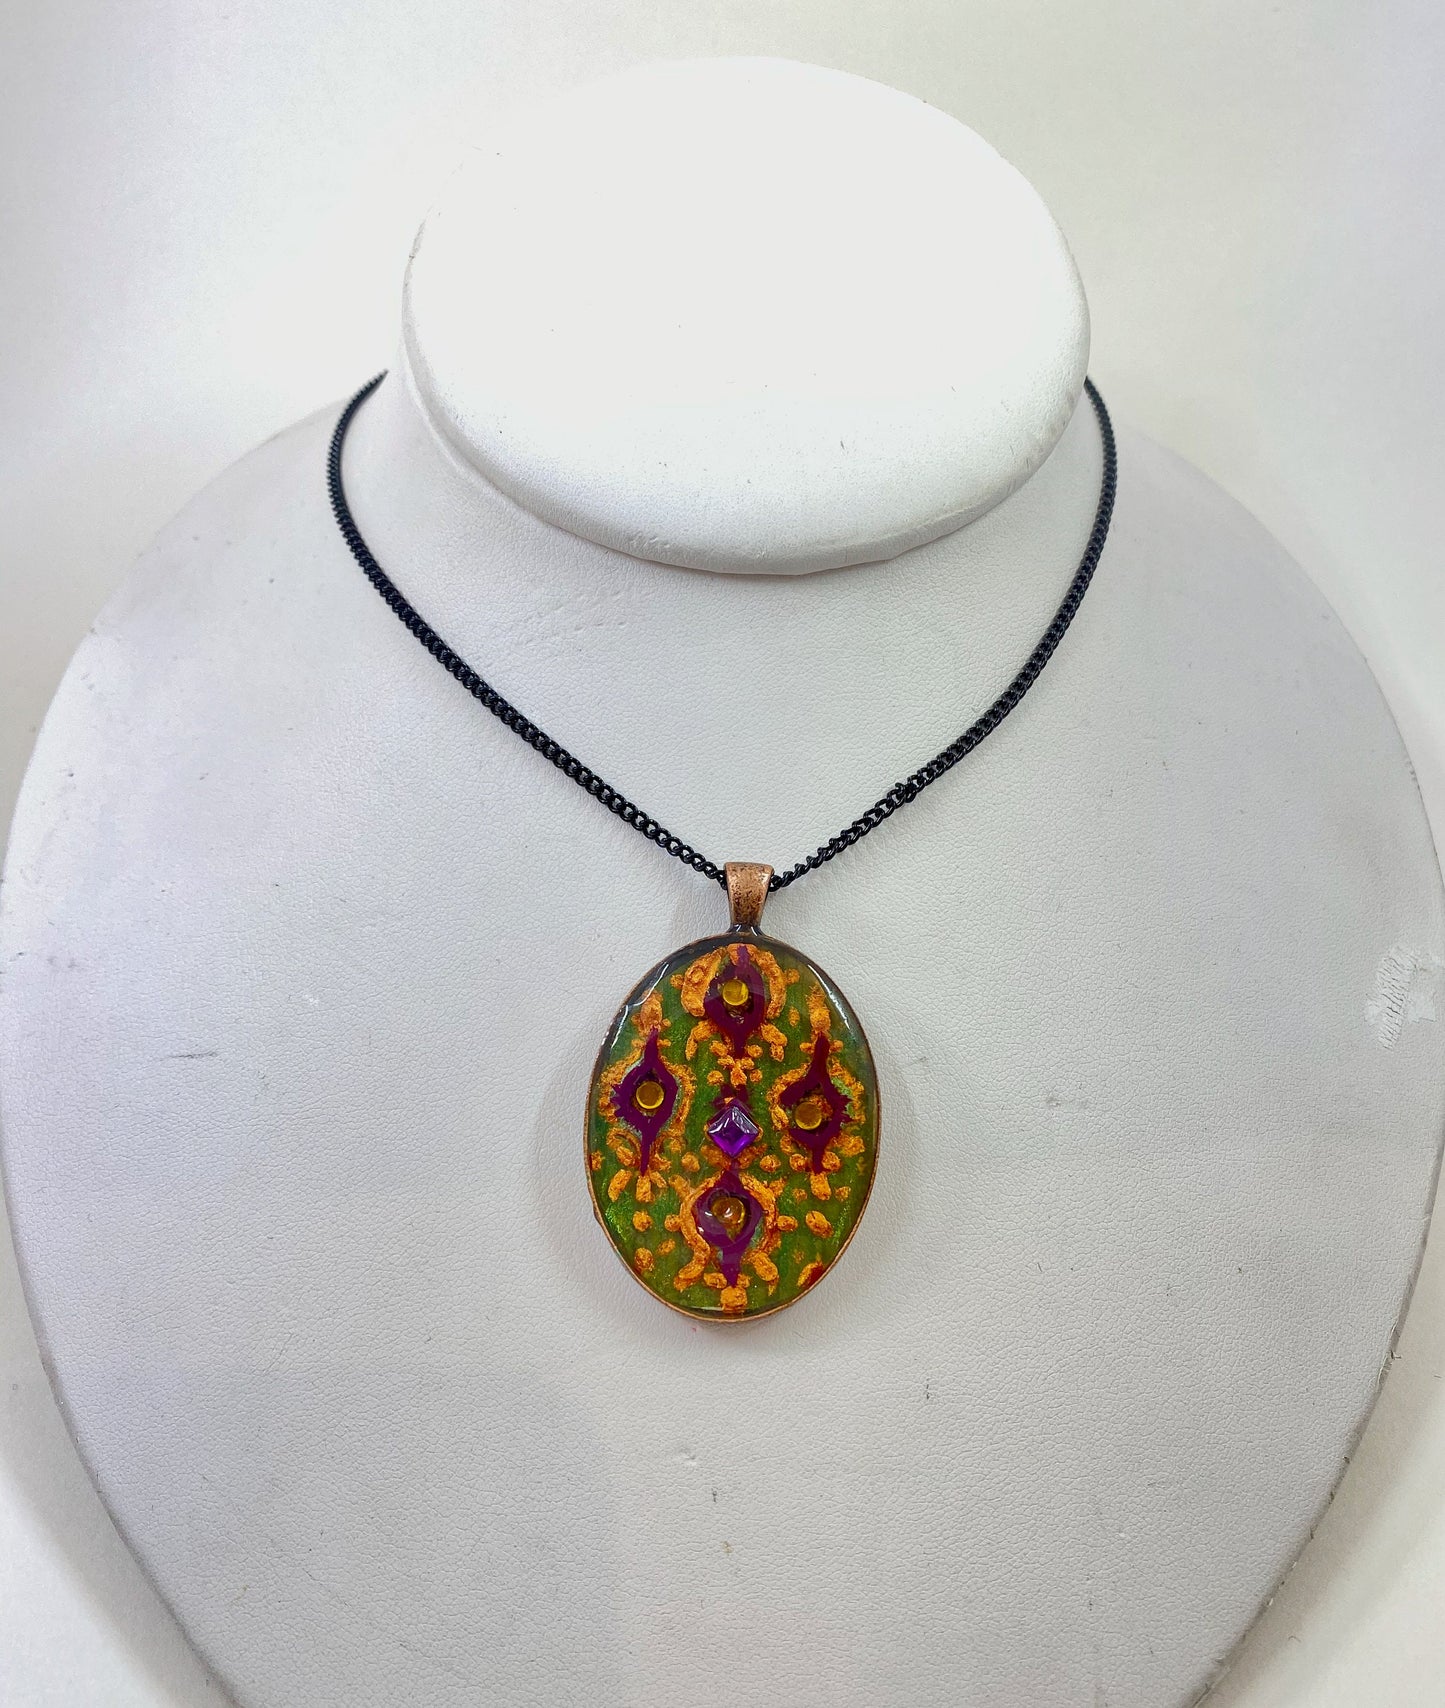 Glass and crystal pendant. Hand painted design accented with crystal beads. Silver frame and 28" contrasting black chain.